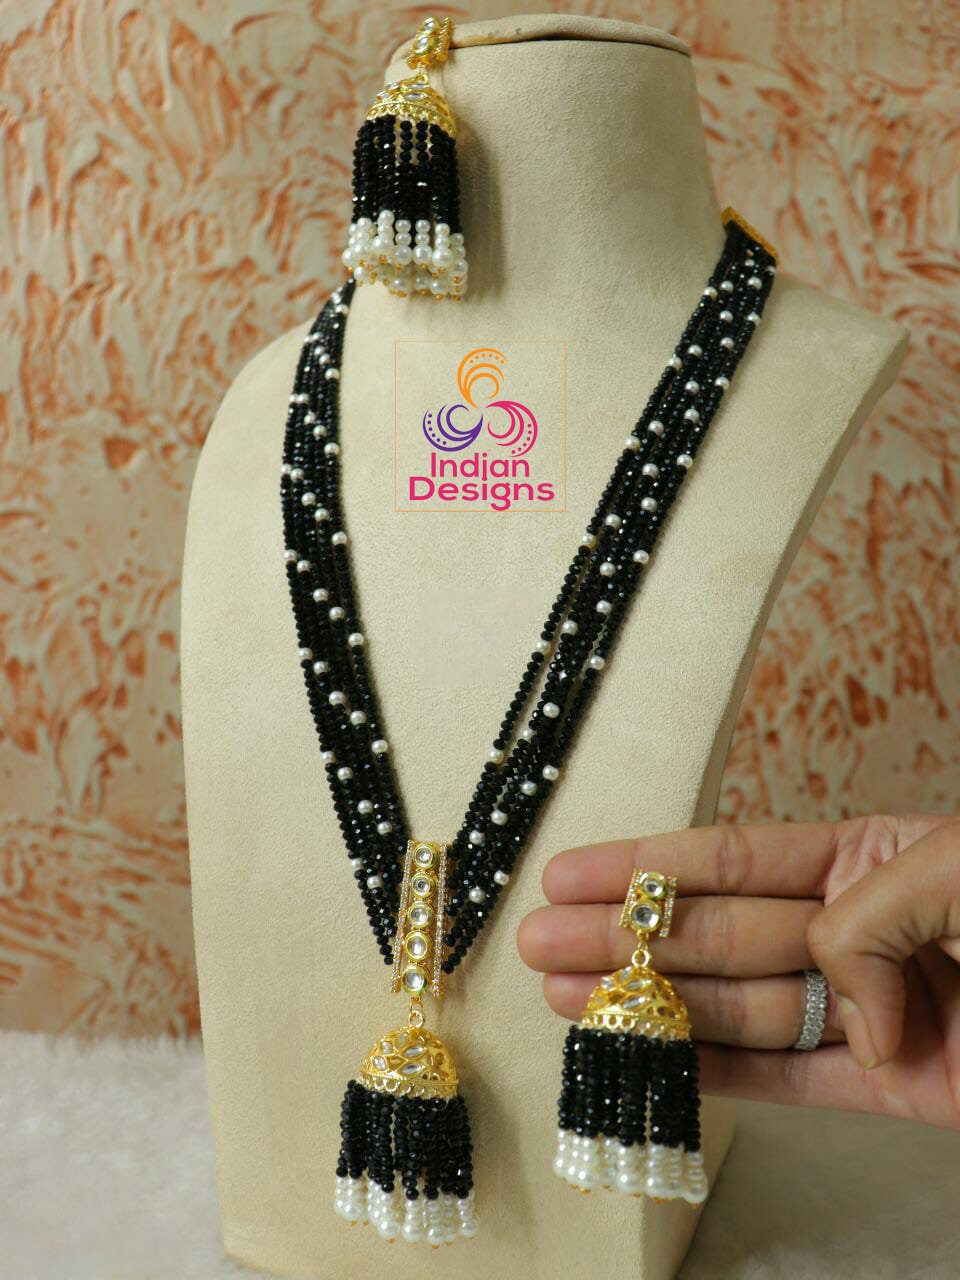 Pink Beads Long Jhumka Necklace |Multi stranded Rani Haar Indian Bollywood Necklace and jhumka Earrings |Wedding party Jewelry |gift for her